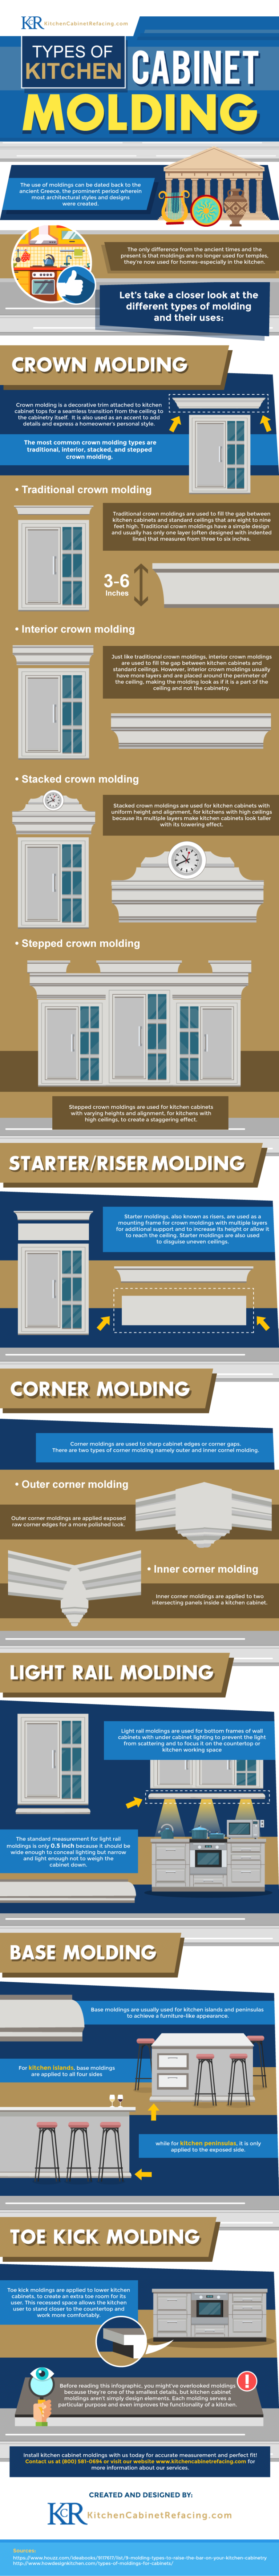  Types of Kitchen Cabinet Molding [Infographic]